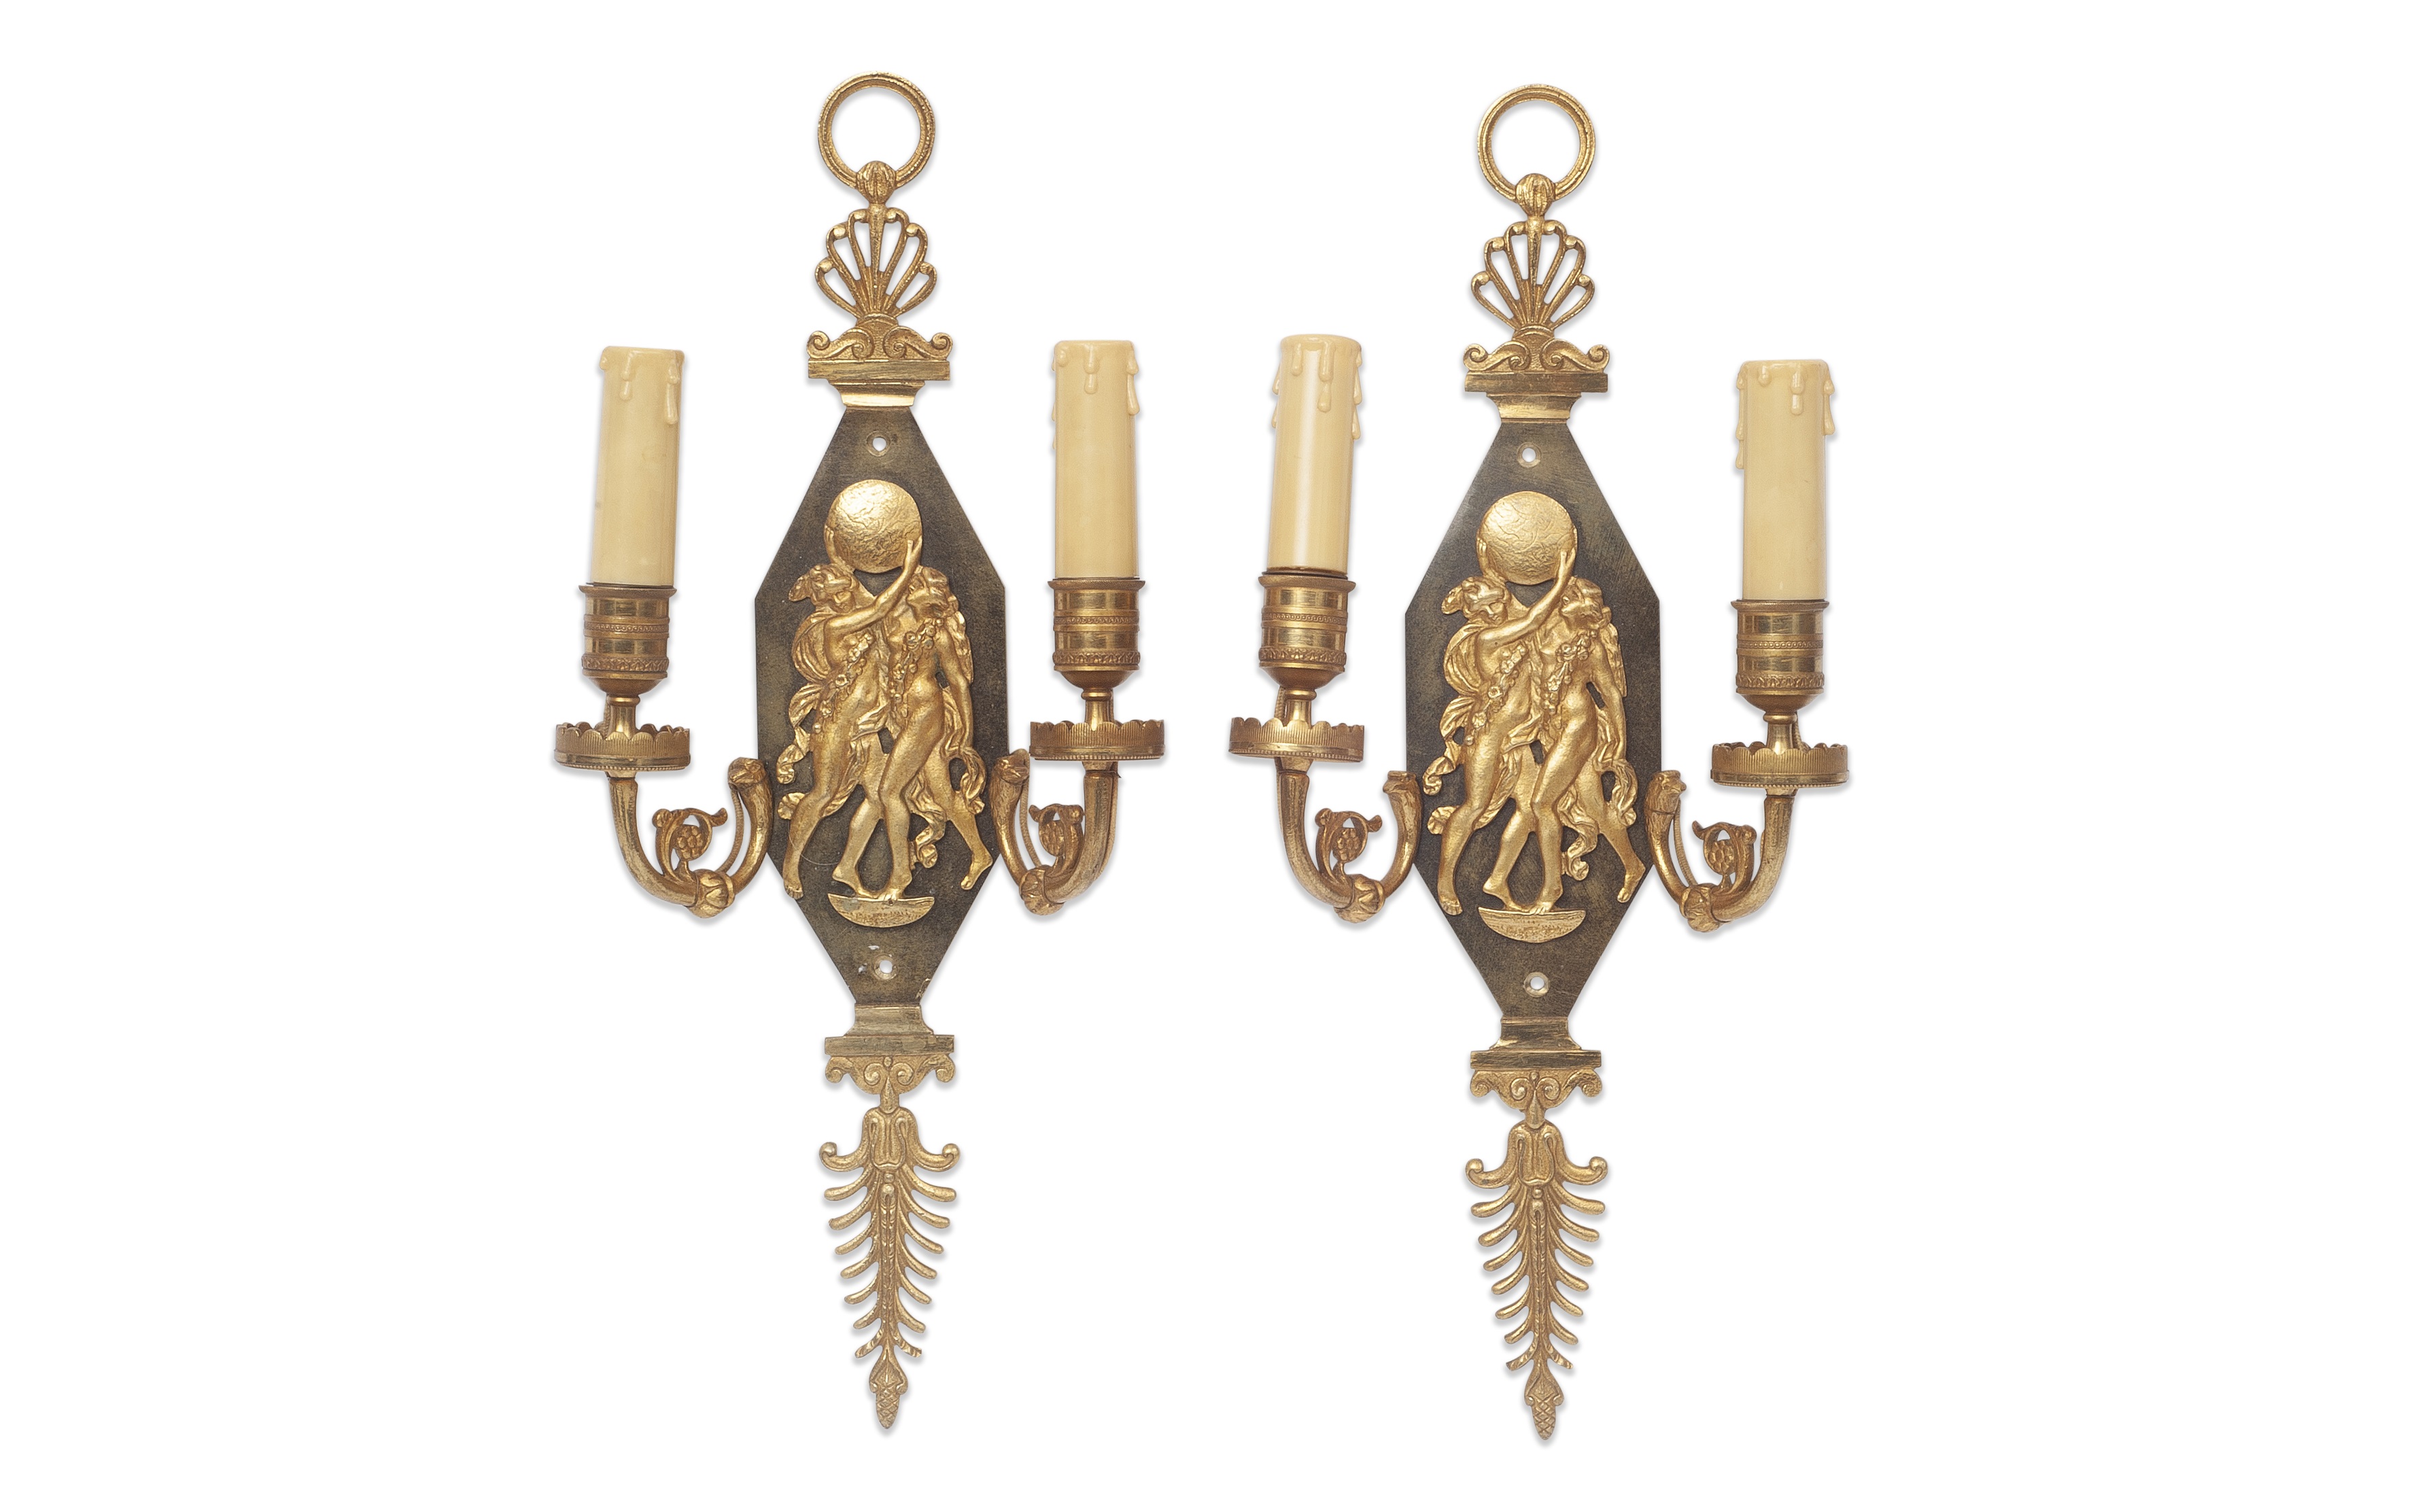 A PAIR OF 19TH CENTURY FRENCH EMPIRE STYLE GILT BRONZE WALL LIGHTS